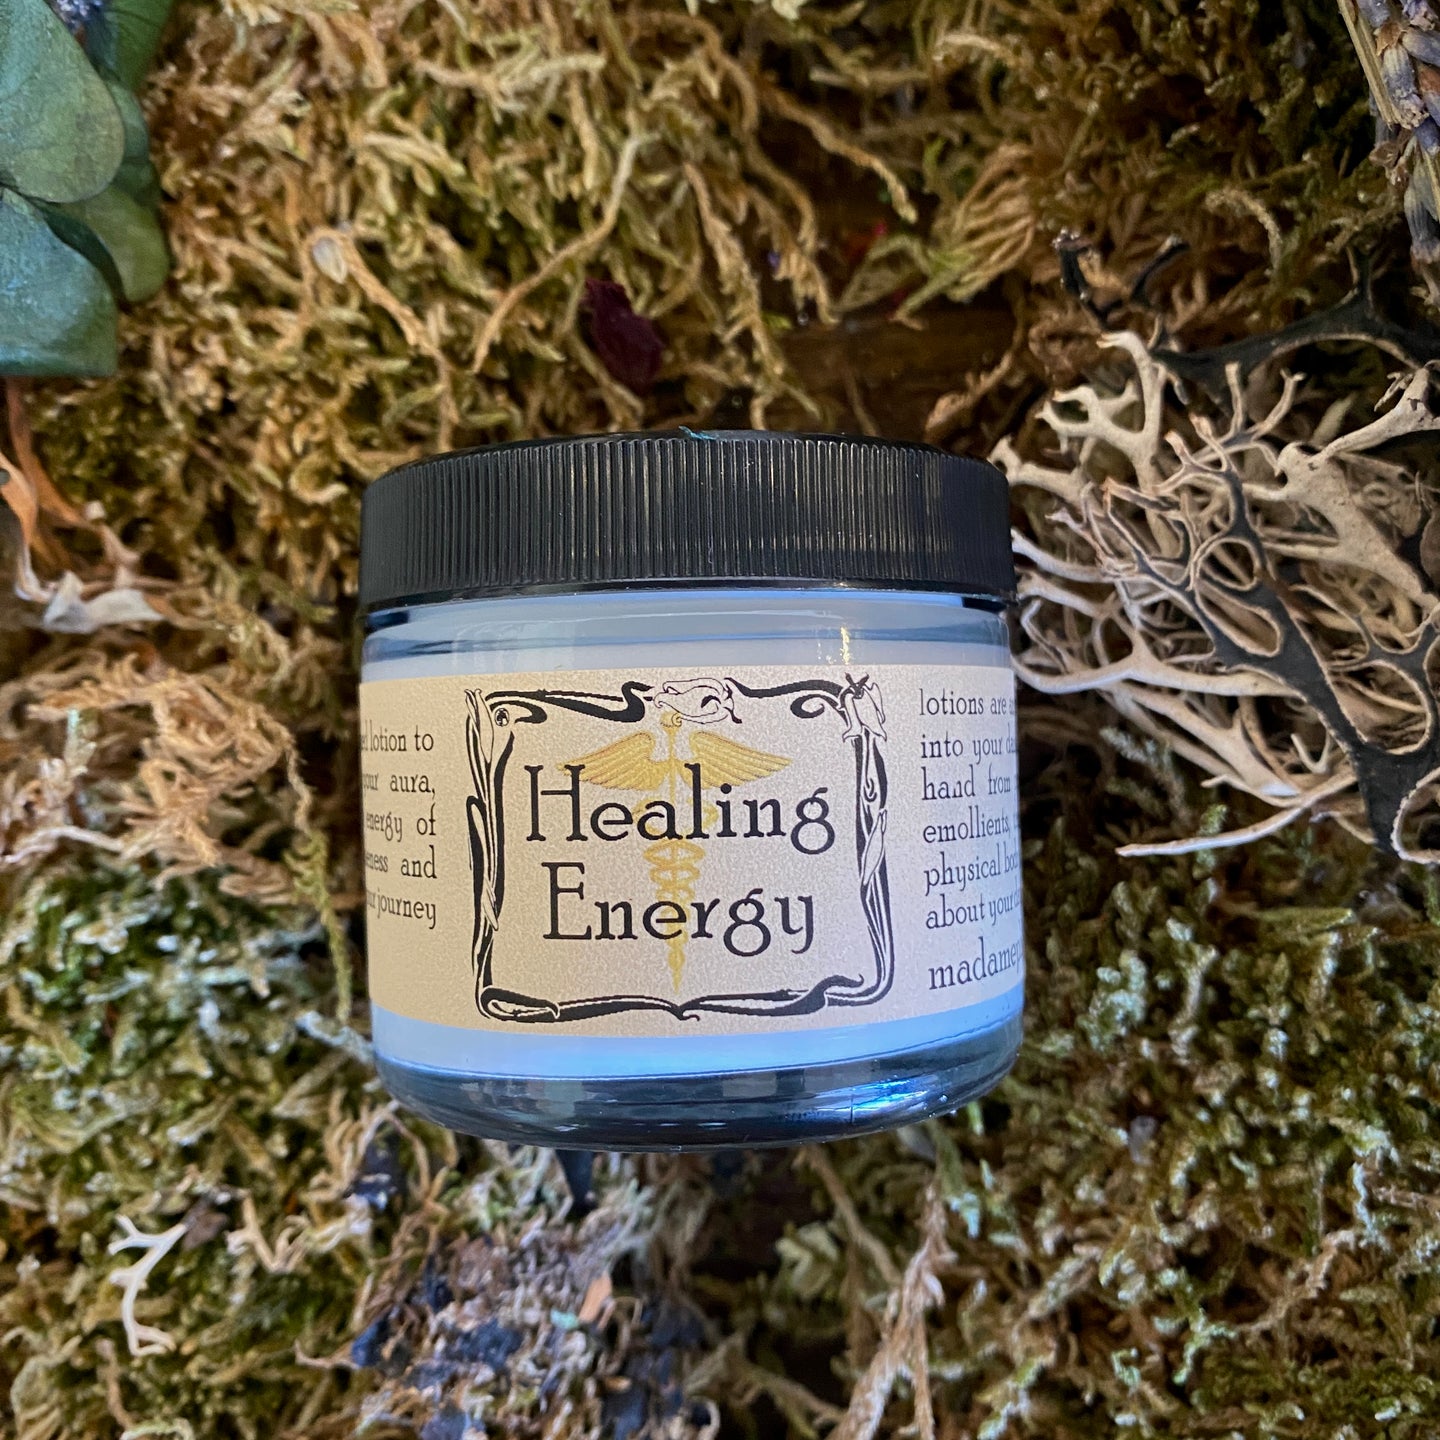 Healing Energy Wholistic Wellness Spell Lotion